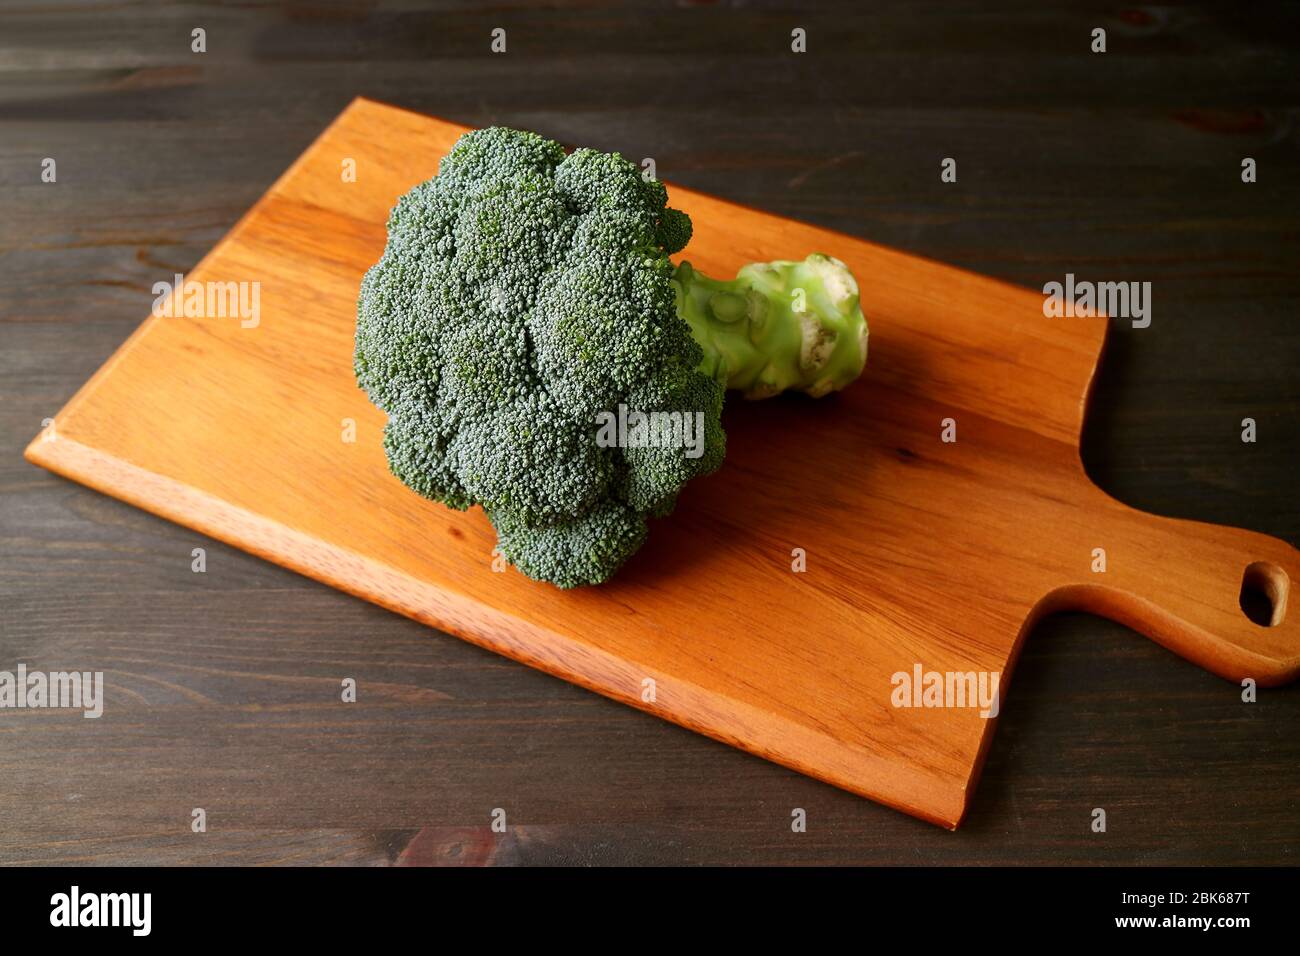 Raw broccoli isolated on a wooden chopping board Stock Photo